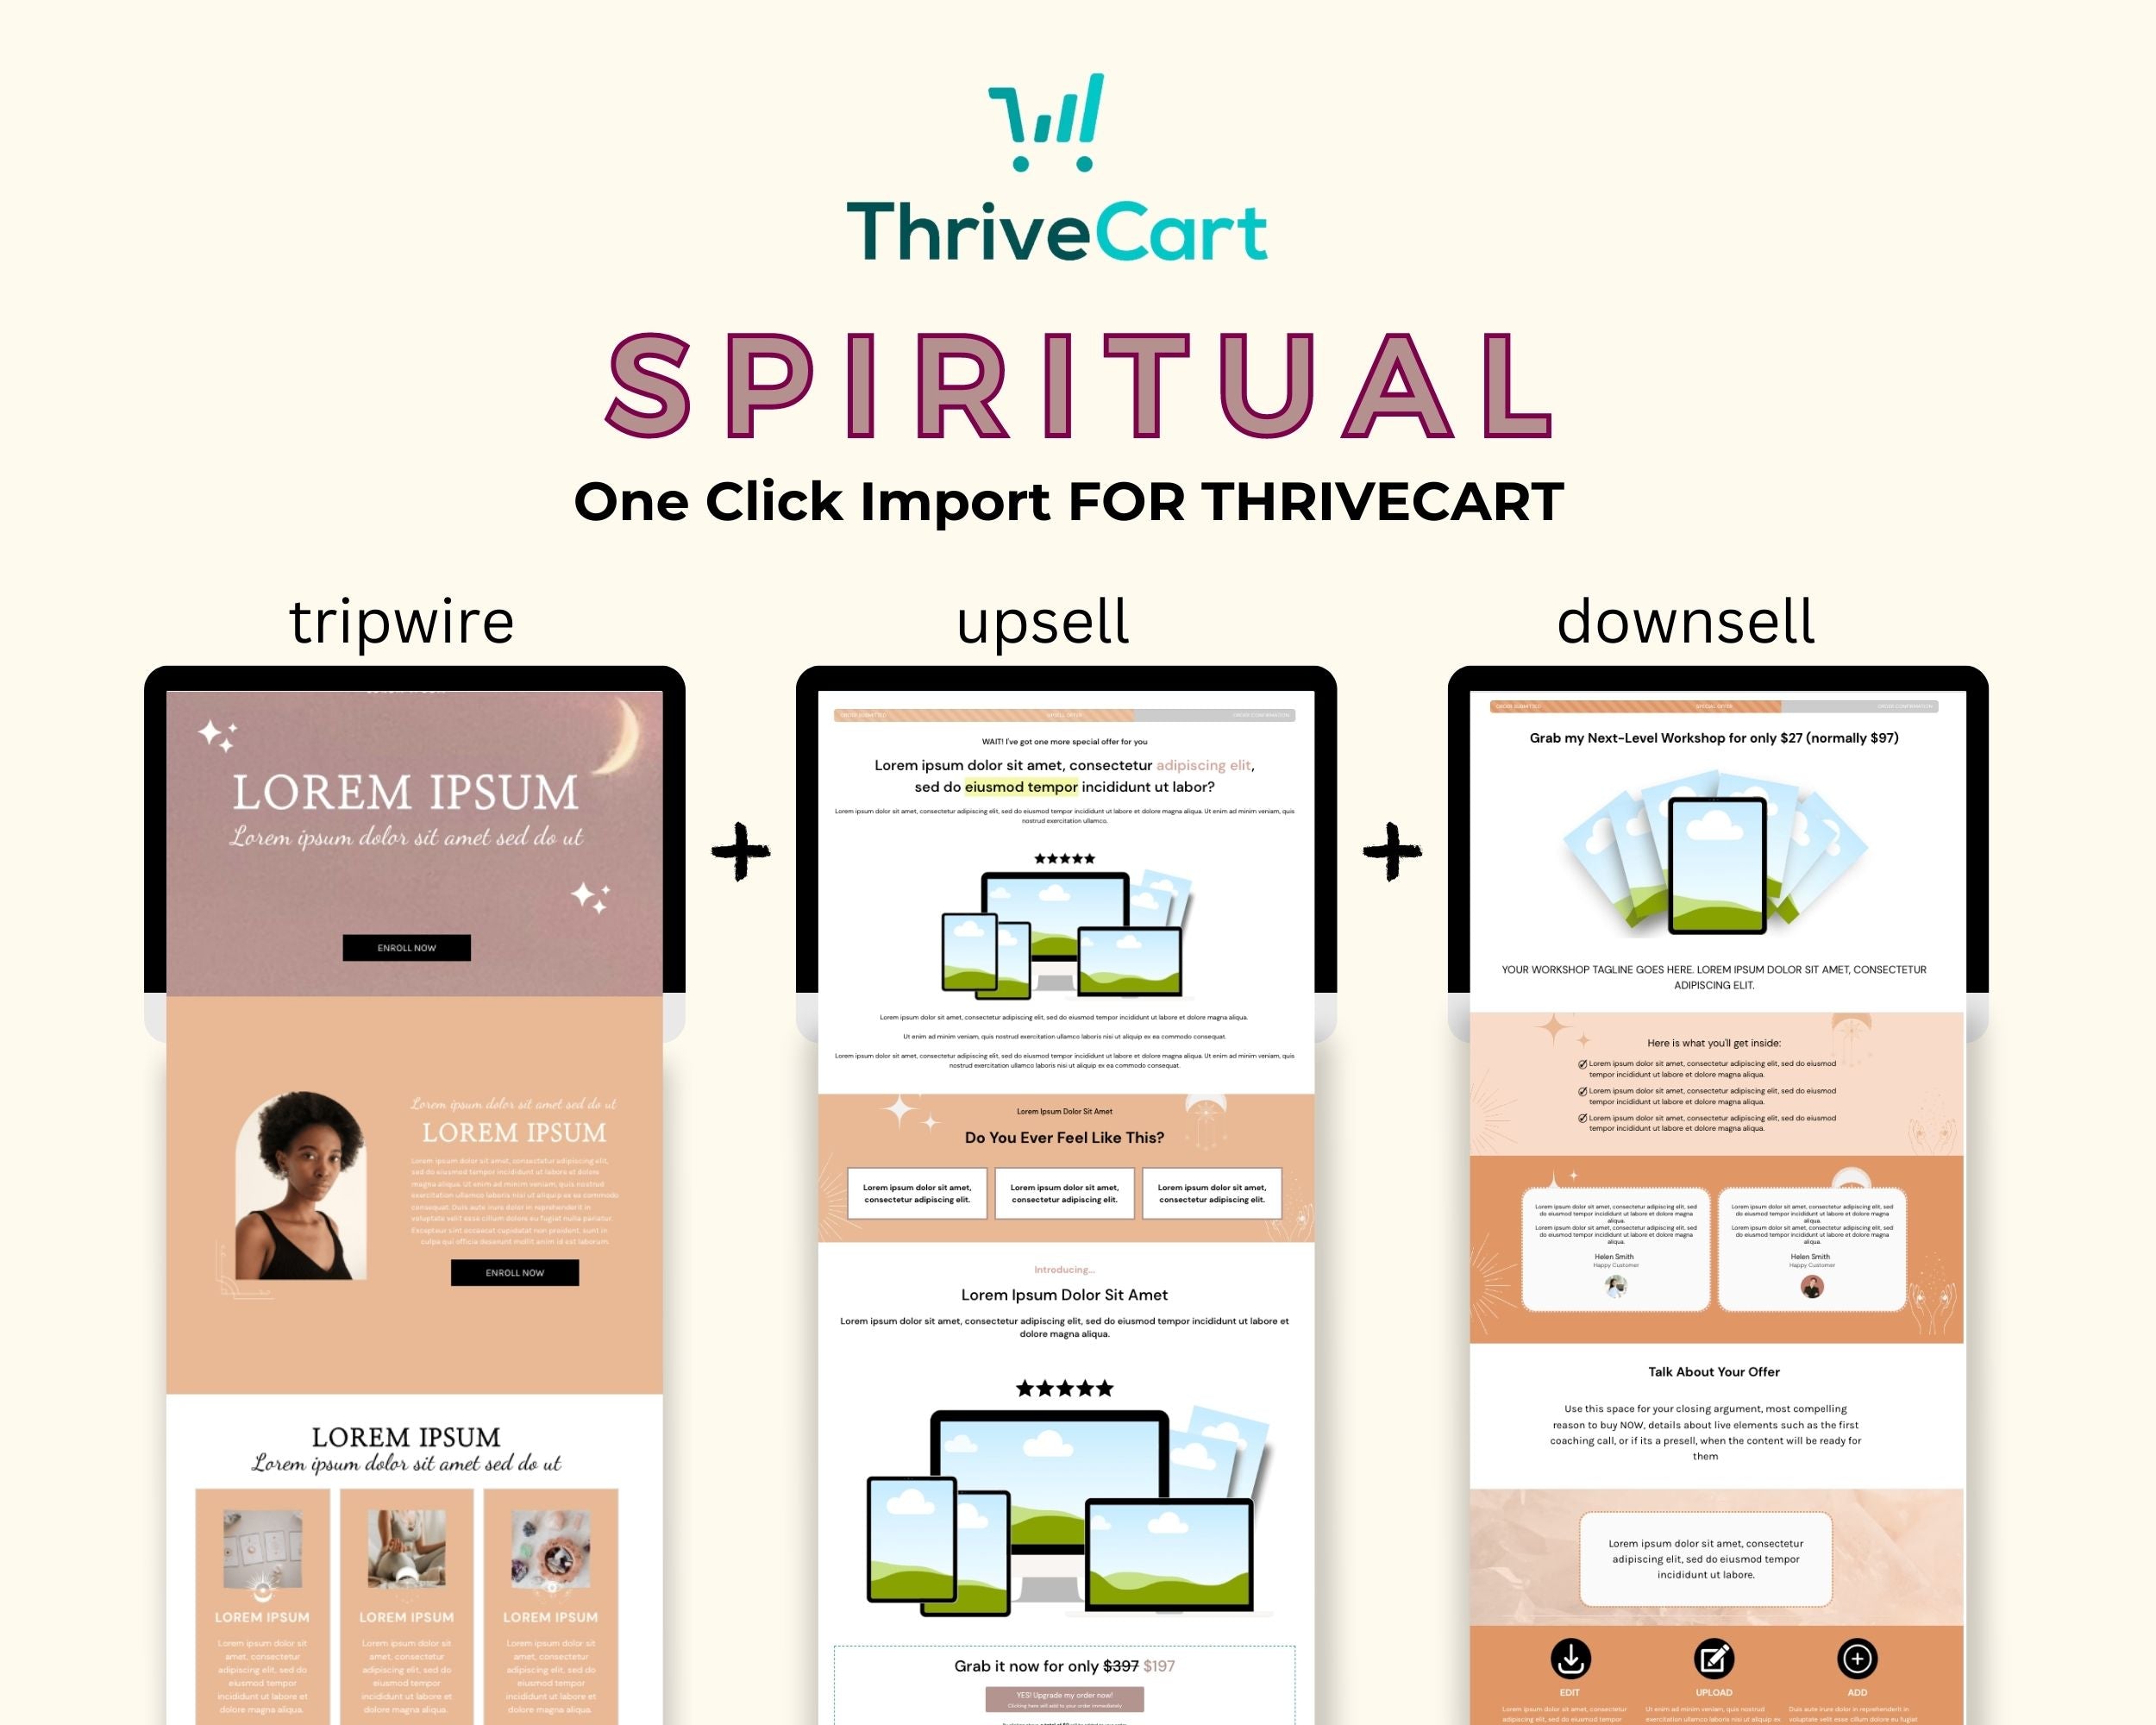 Spiritual ThriveCart 4-Page Sales Funnel Template